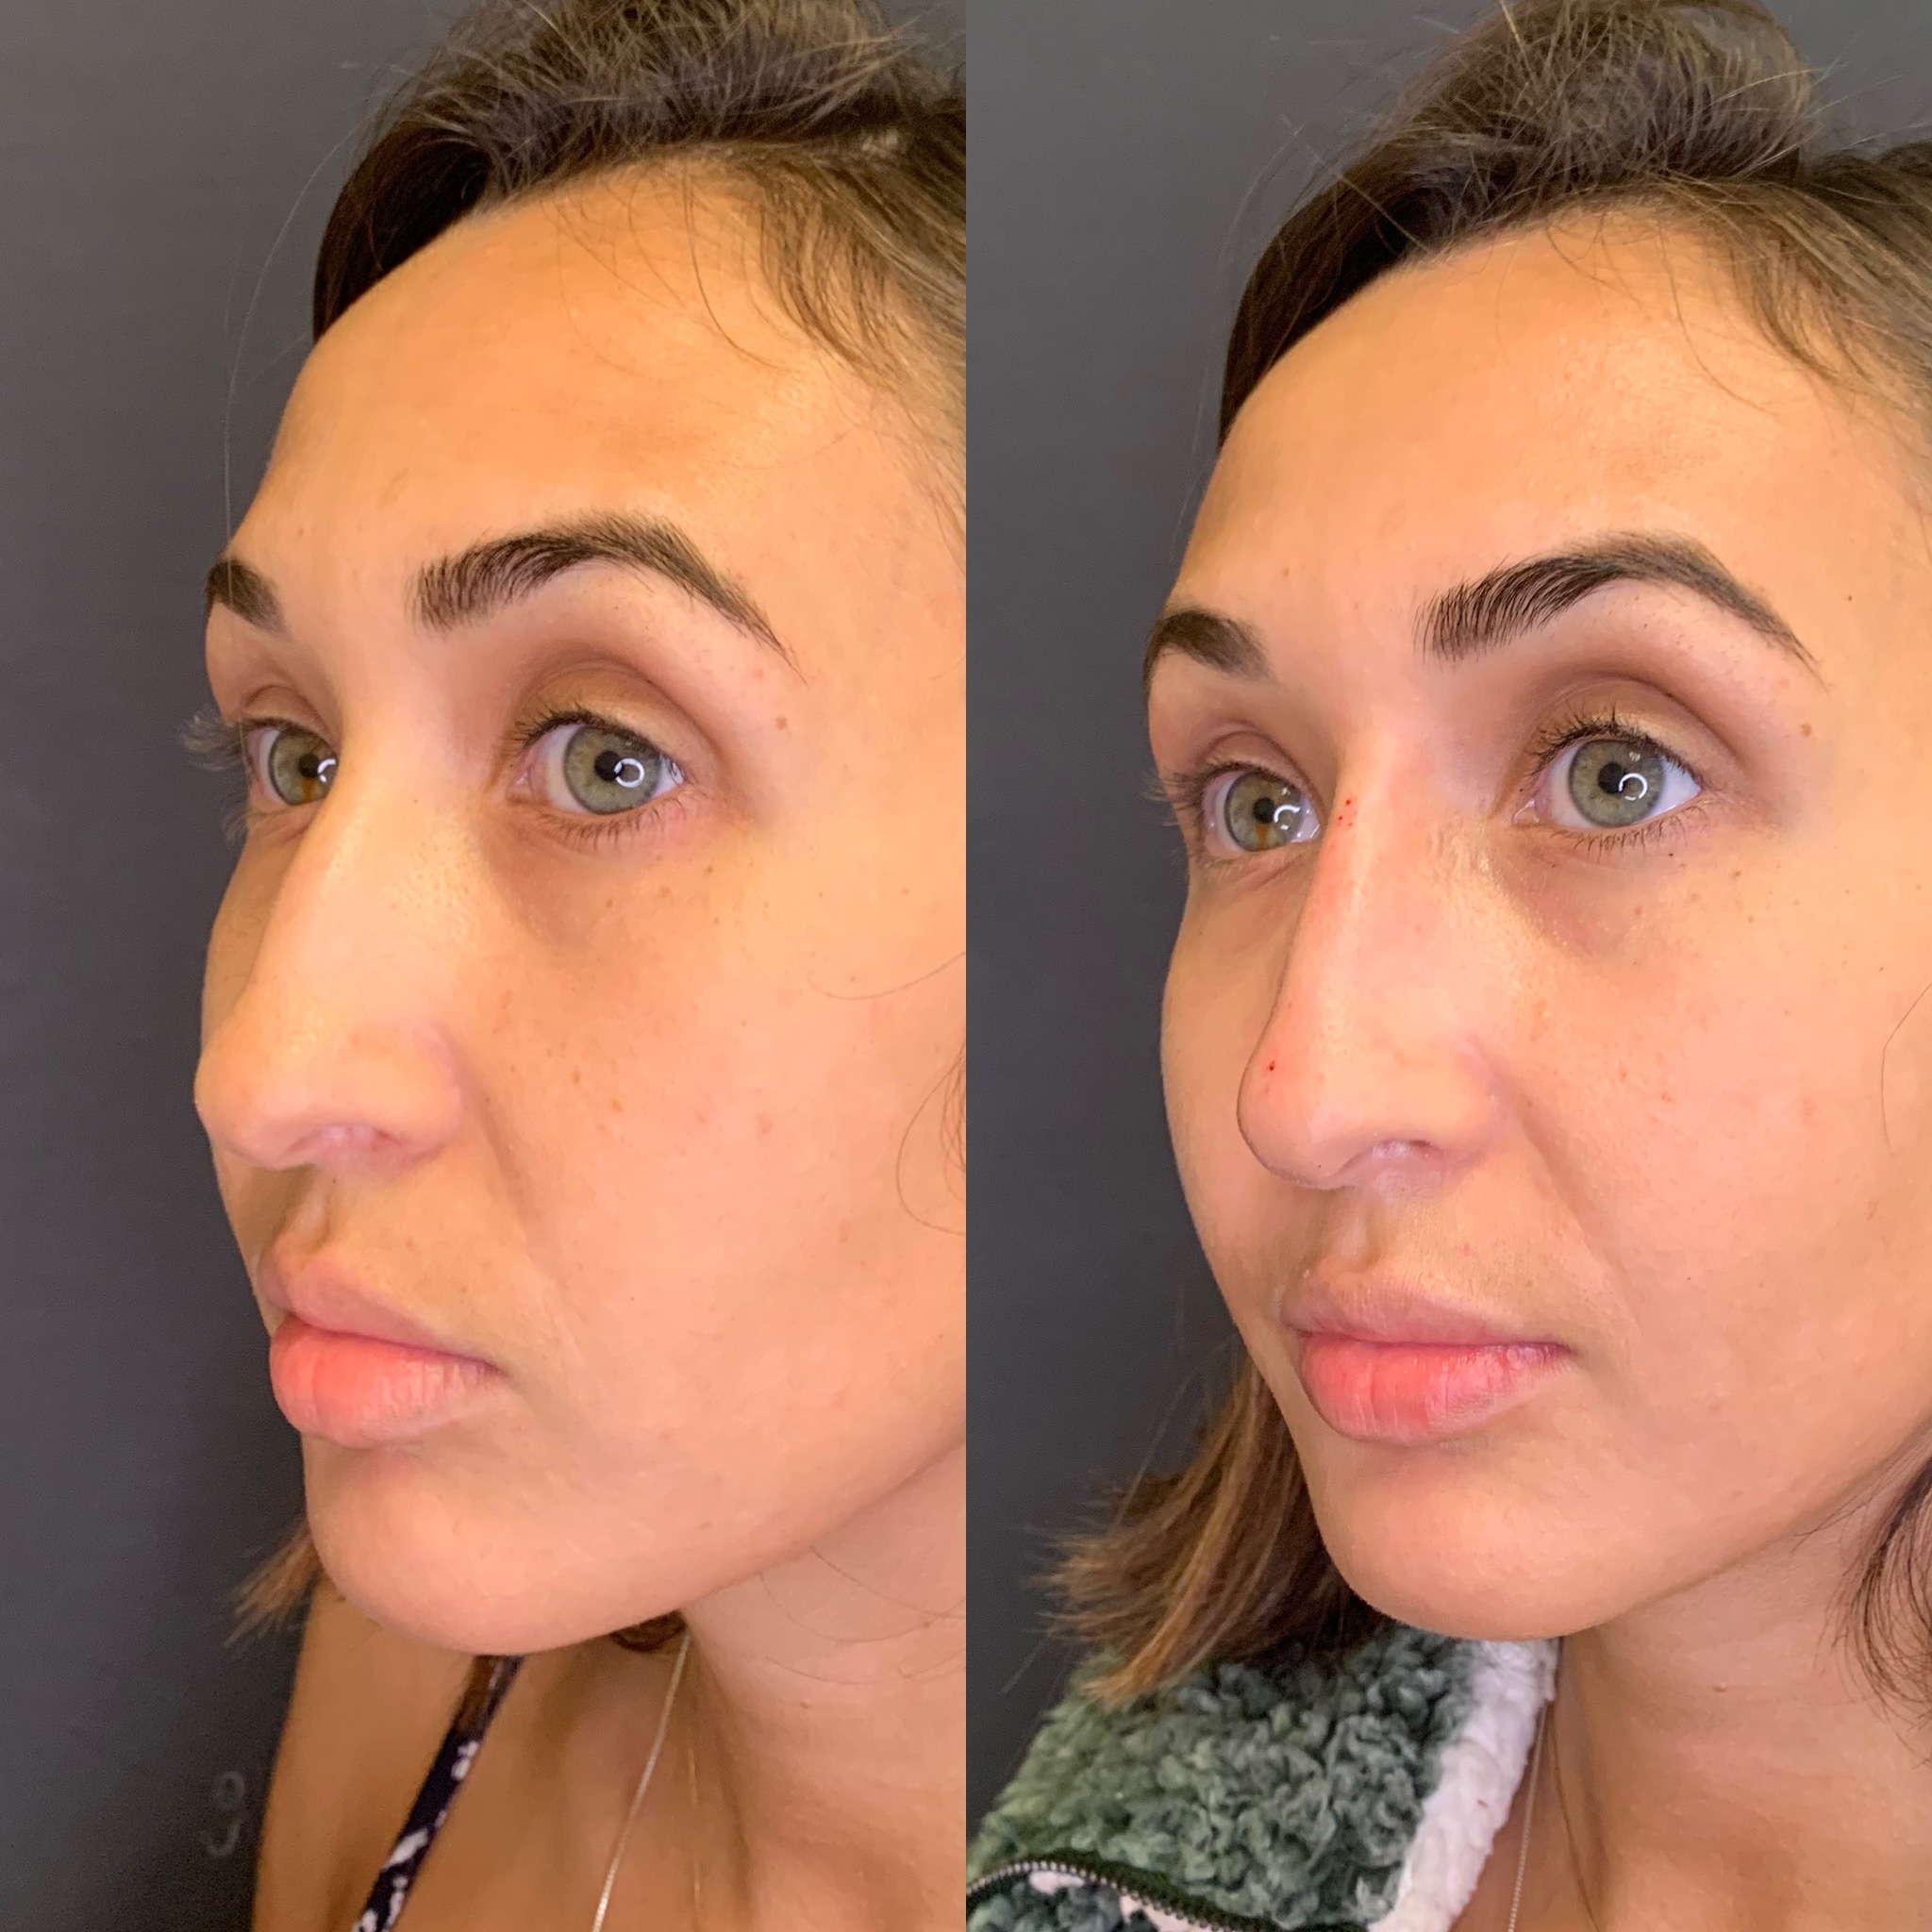 Before and After Treatment on Nose | Beauty Boost Med Spa in Newport Beach, CA